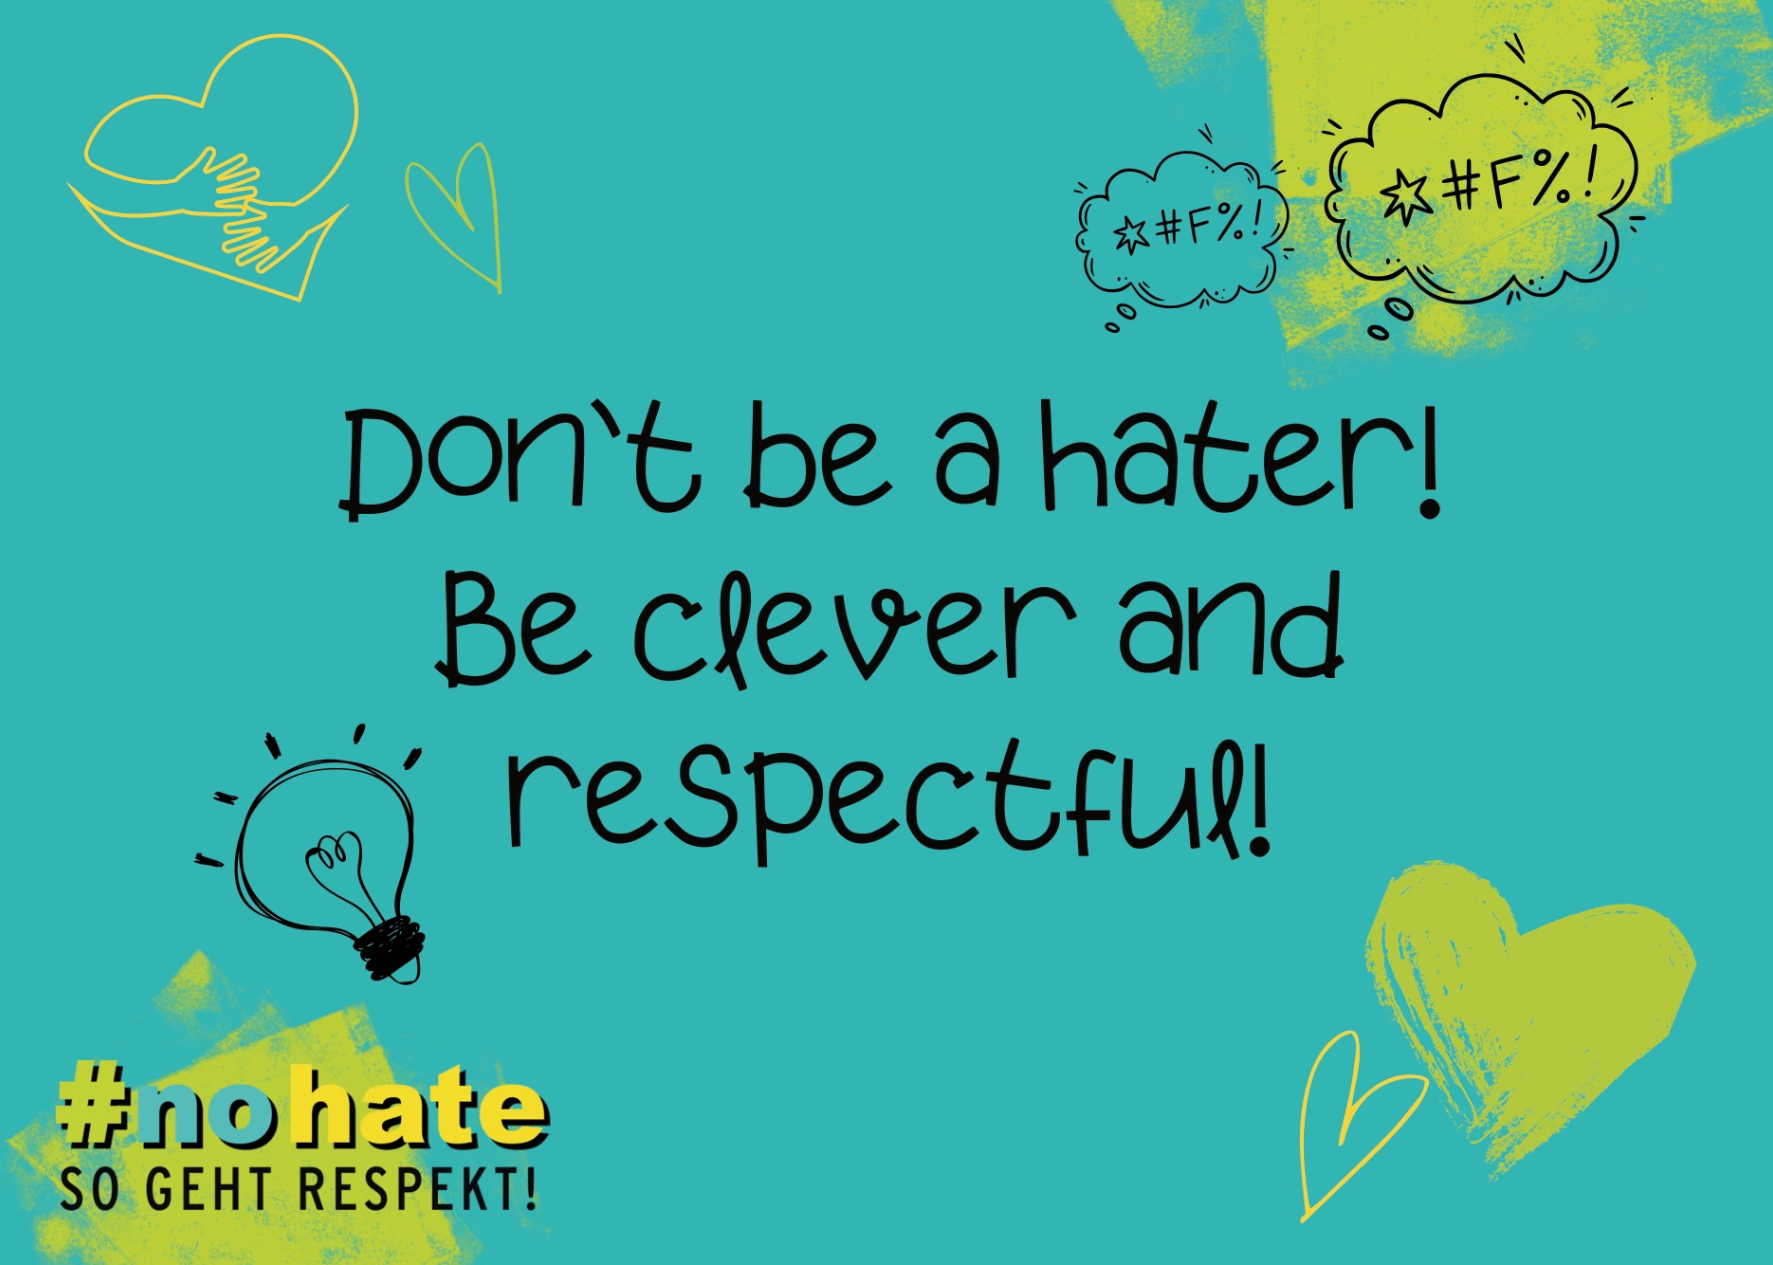 Postkarten- und Stickermotiv "Don't be a hater! Be clever and respectful!"